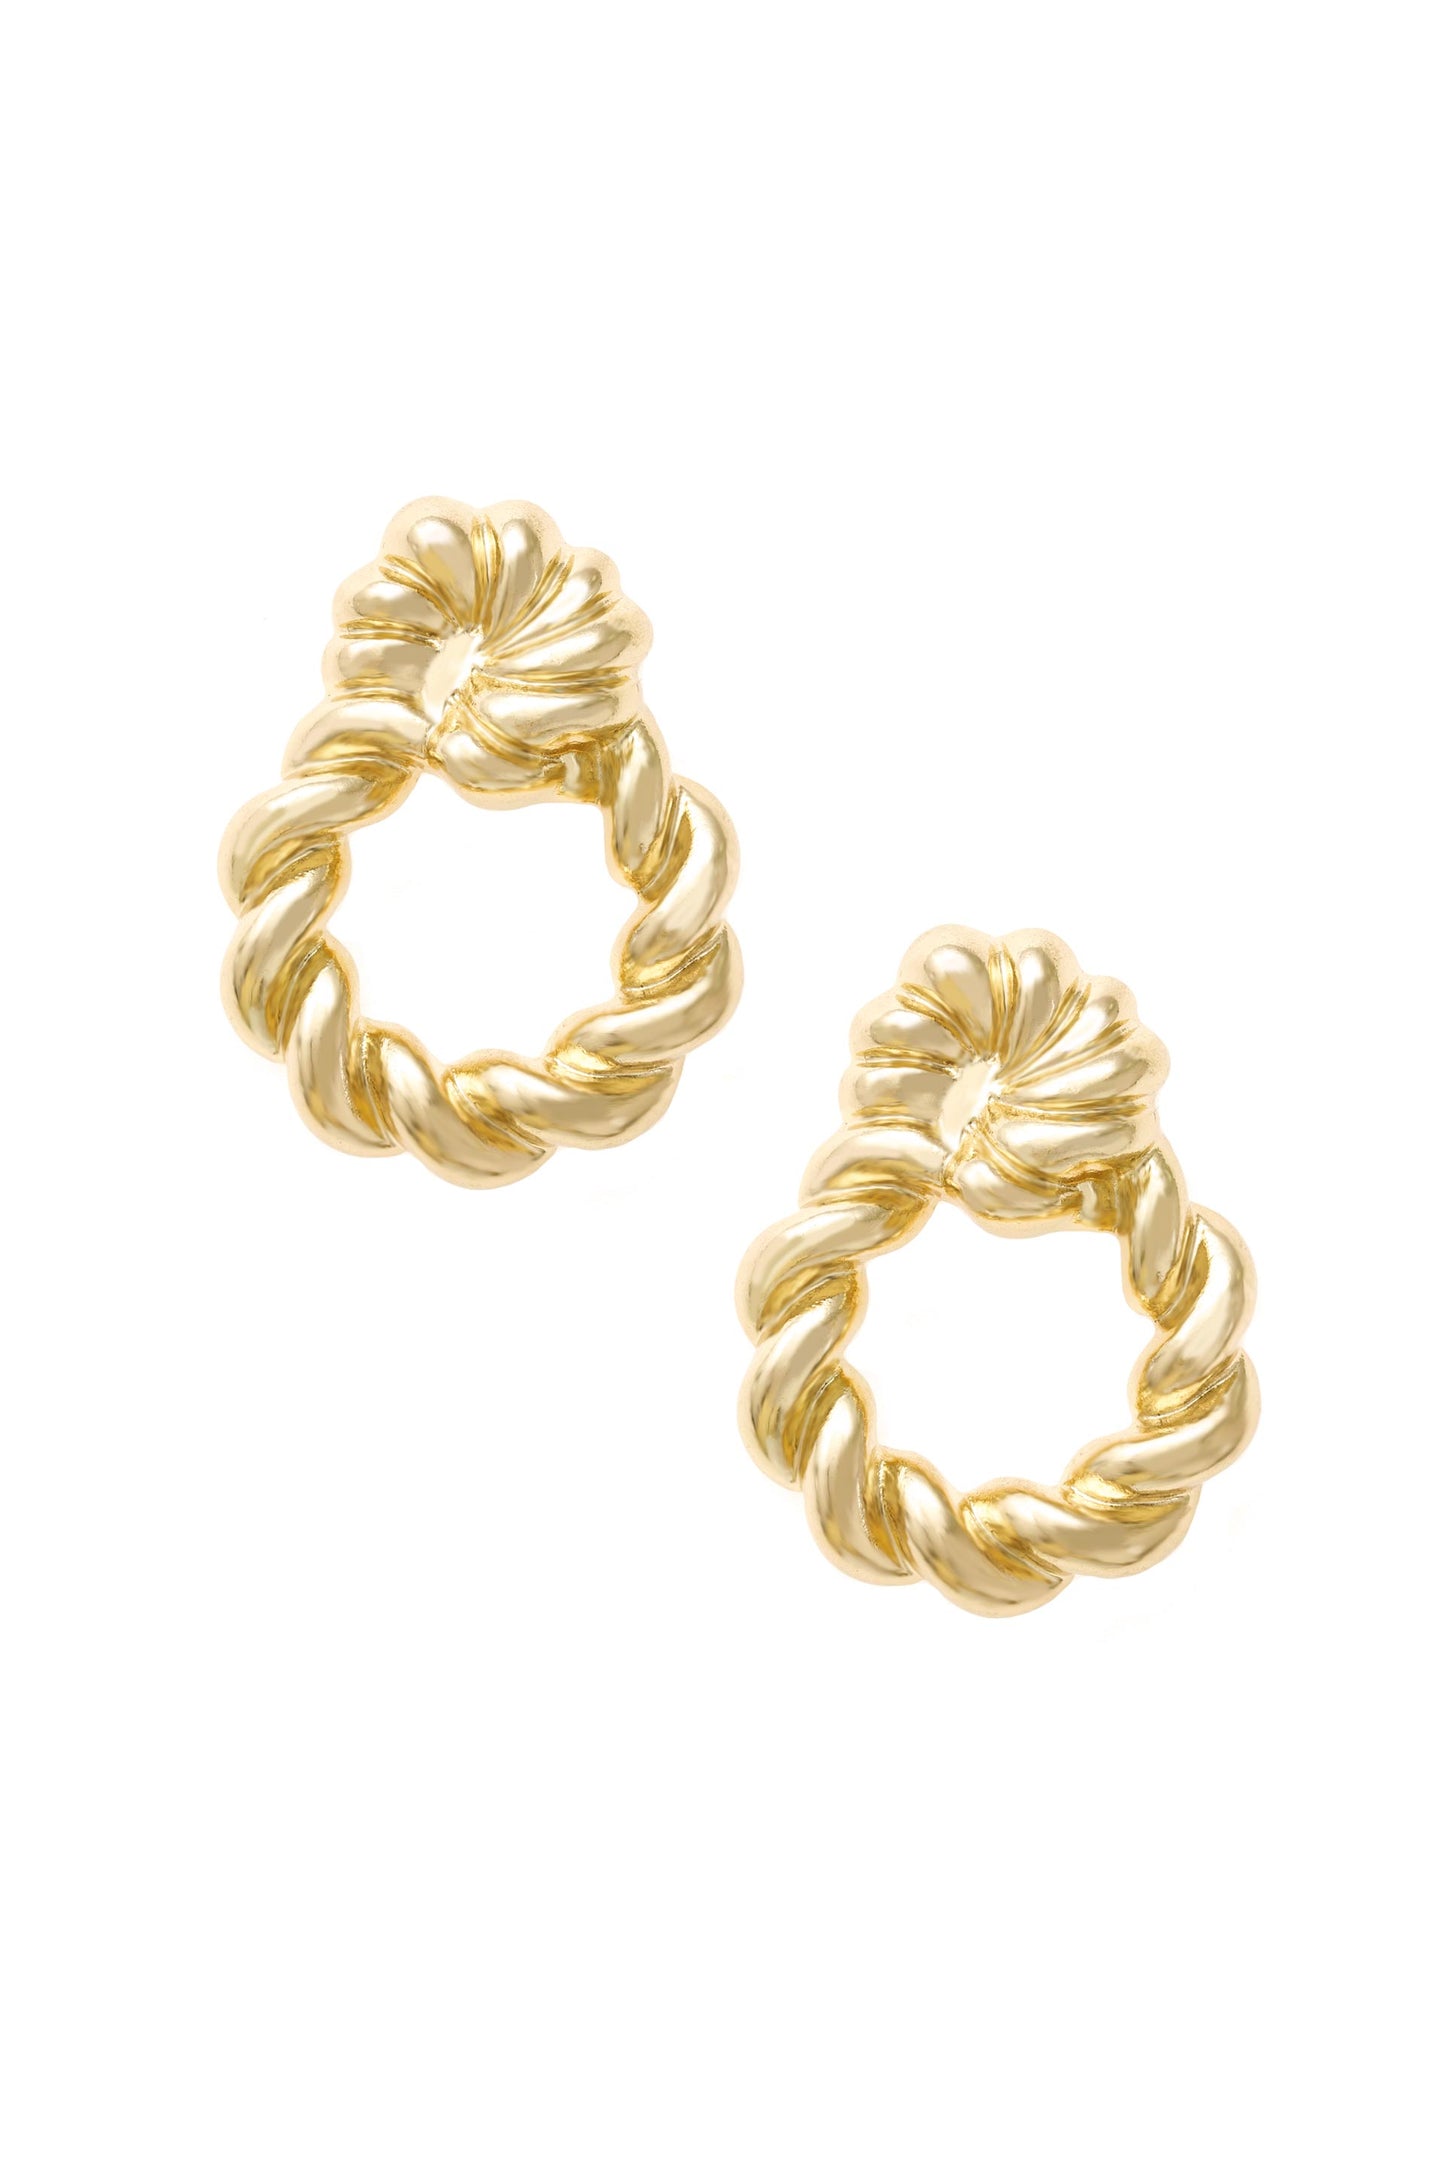 Twist and Shout 18k Gold Plated Textured Earrings on white background